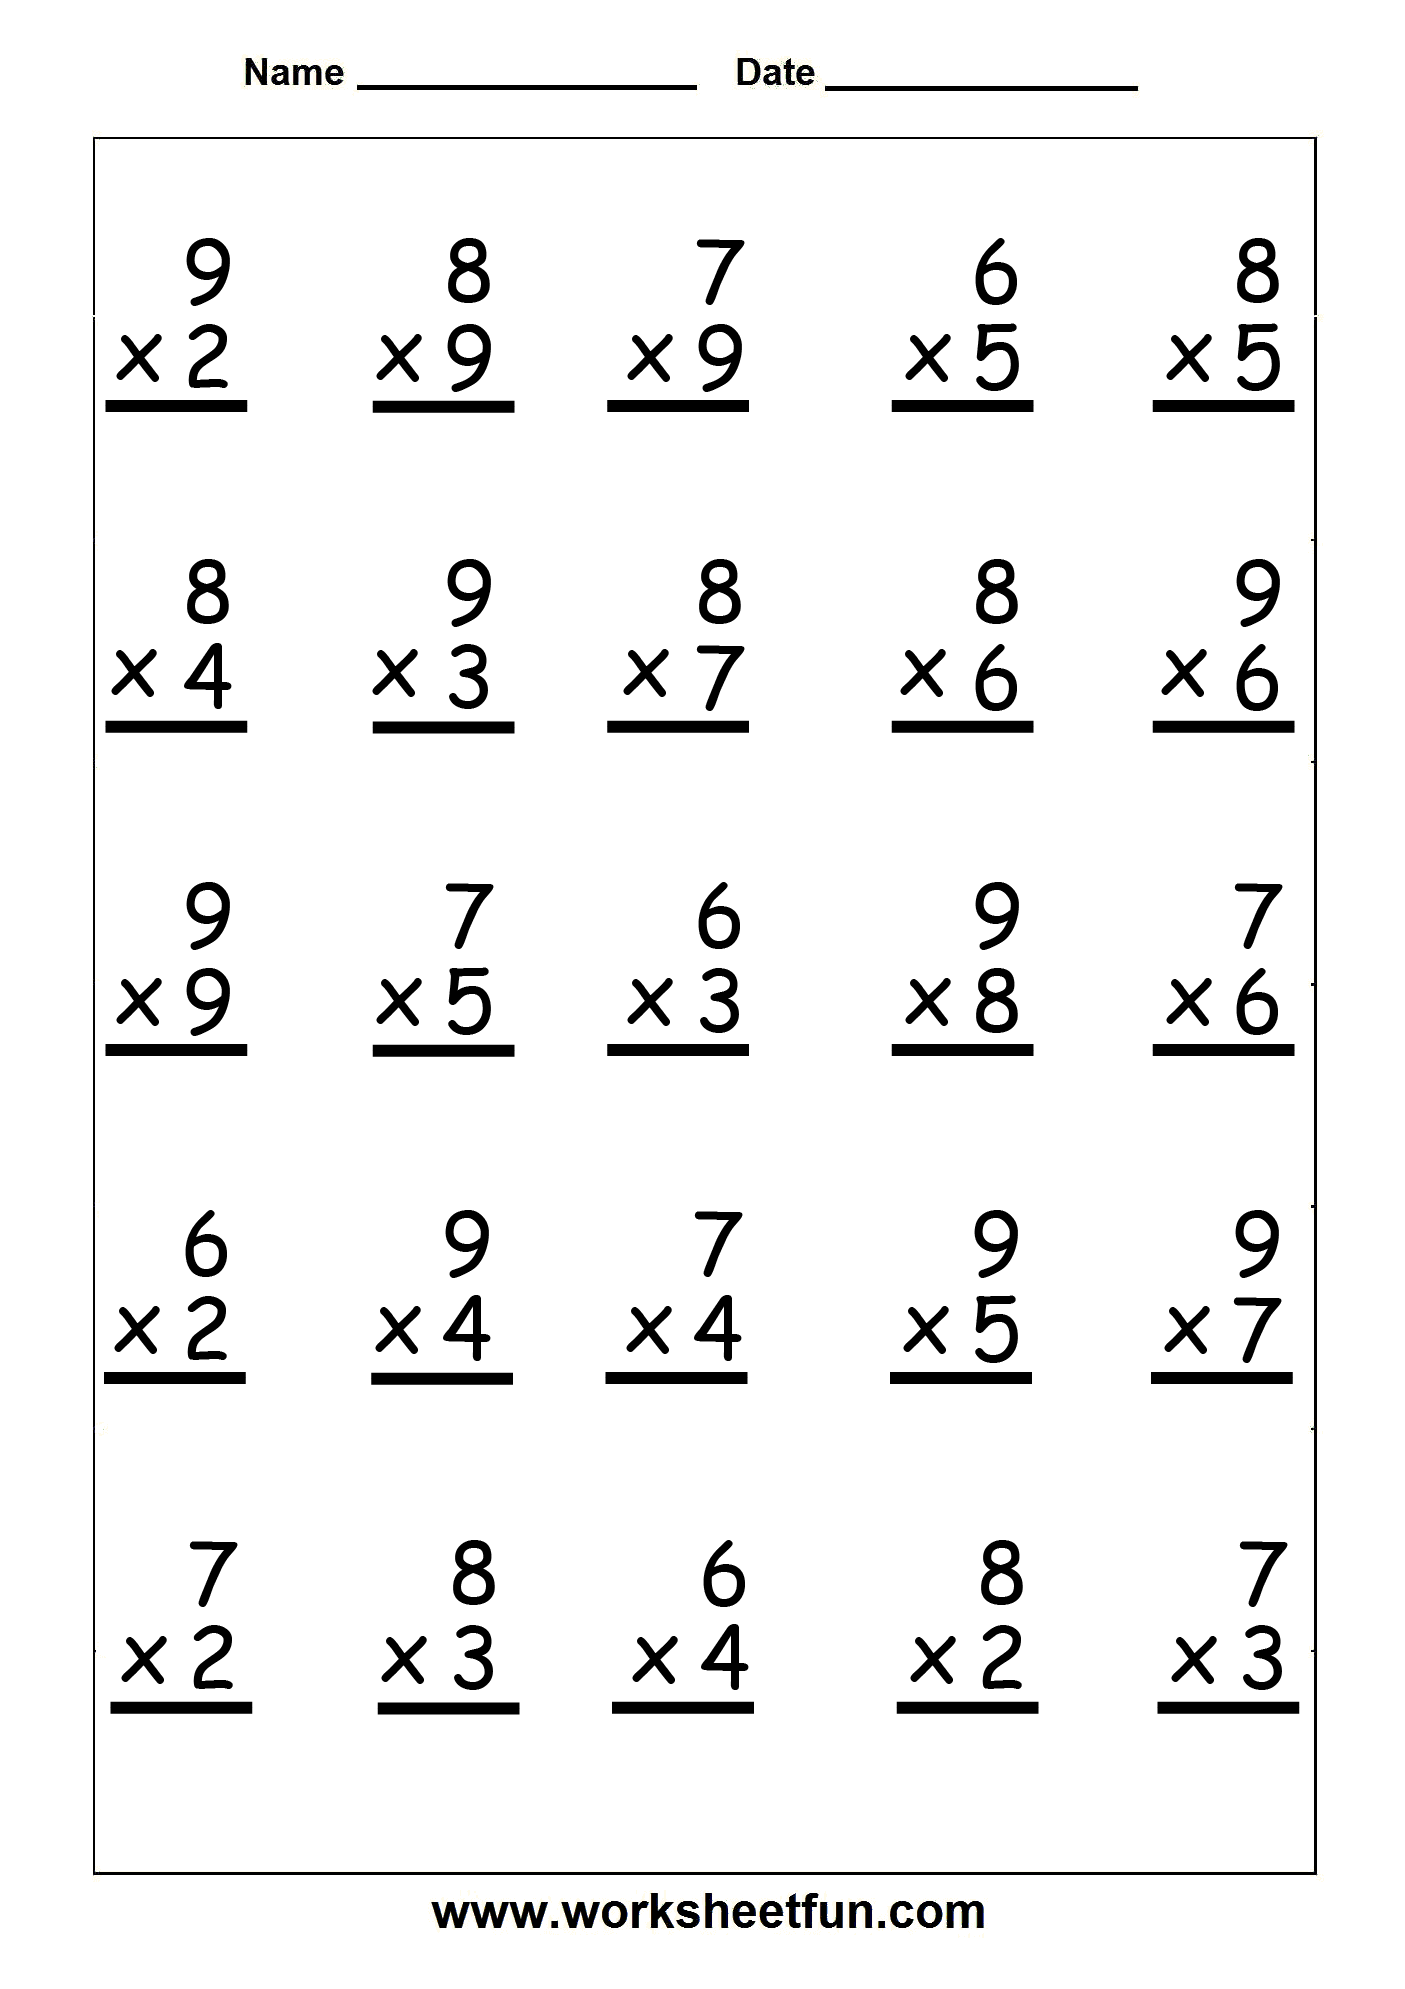 17-best-images-of-numbers-1-12-worksheets-math-multiplication-worksheets-1-12-matching